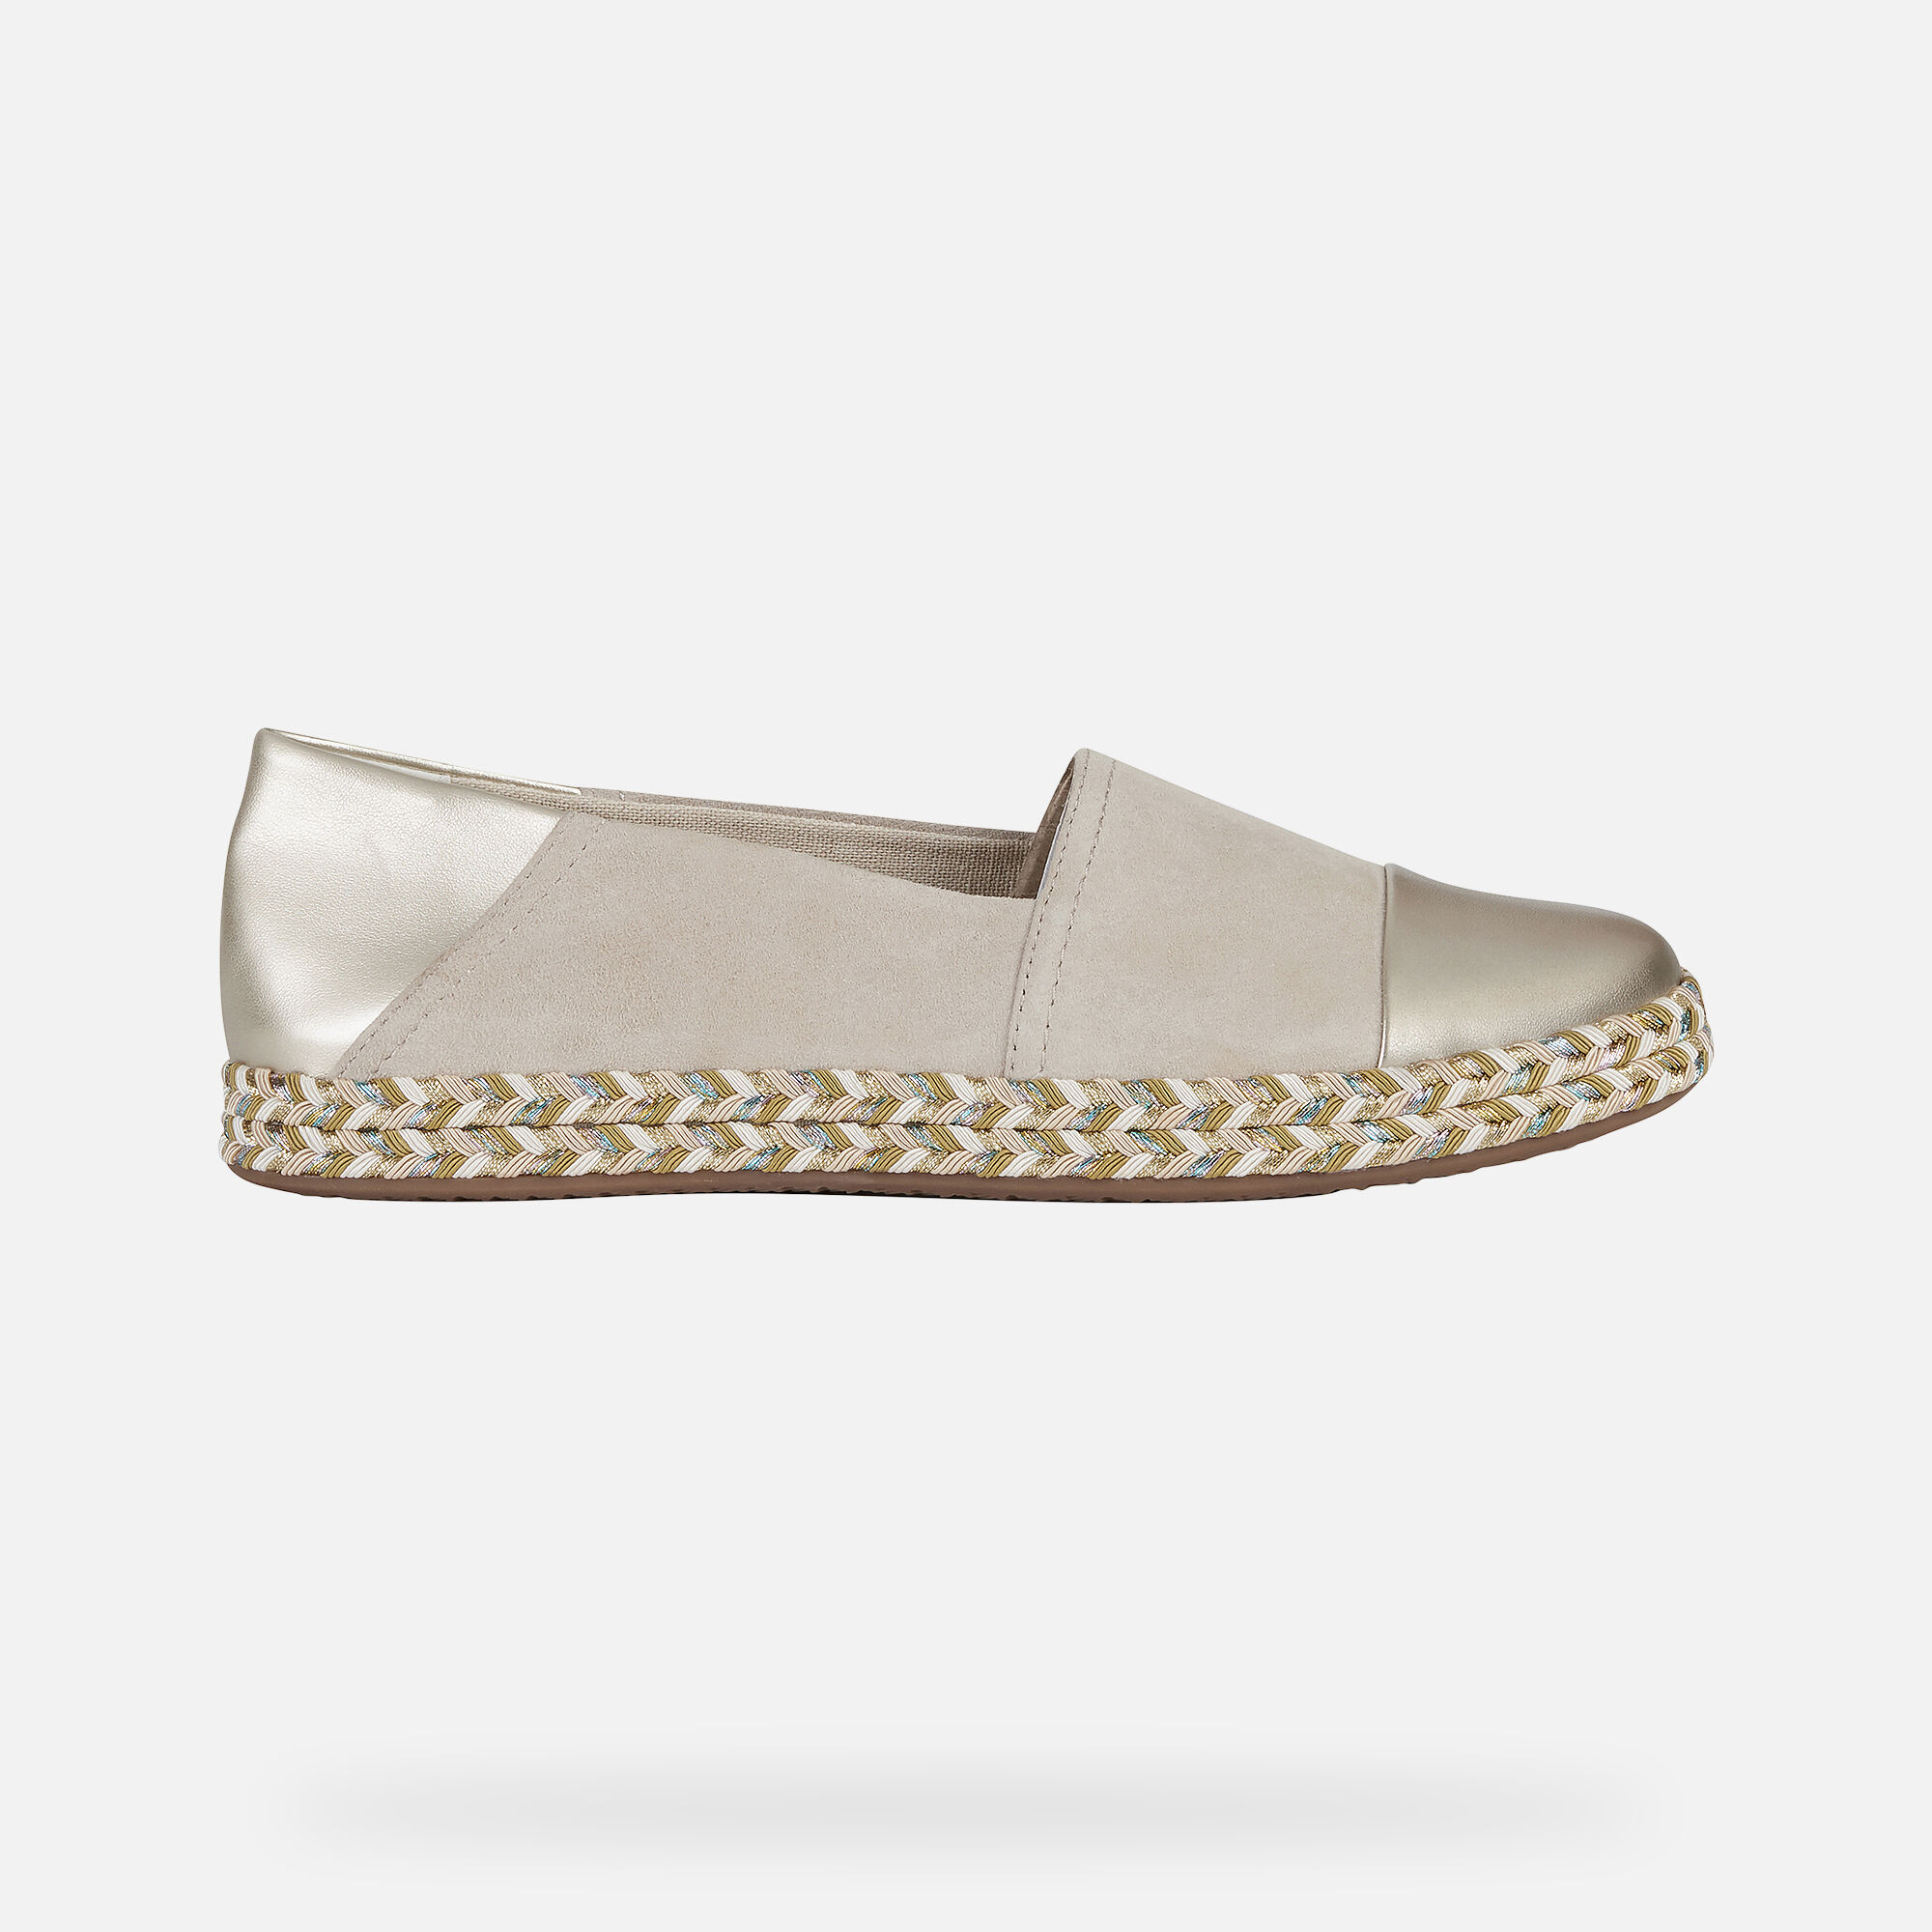 Geox MODESTY Woman: Sand Sneakers 